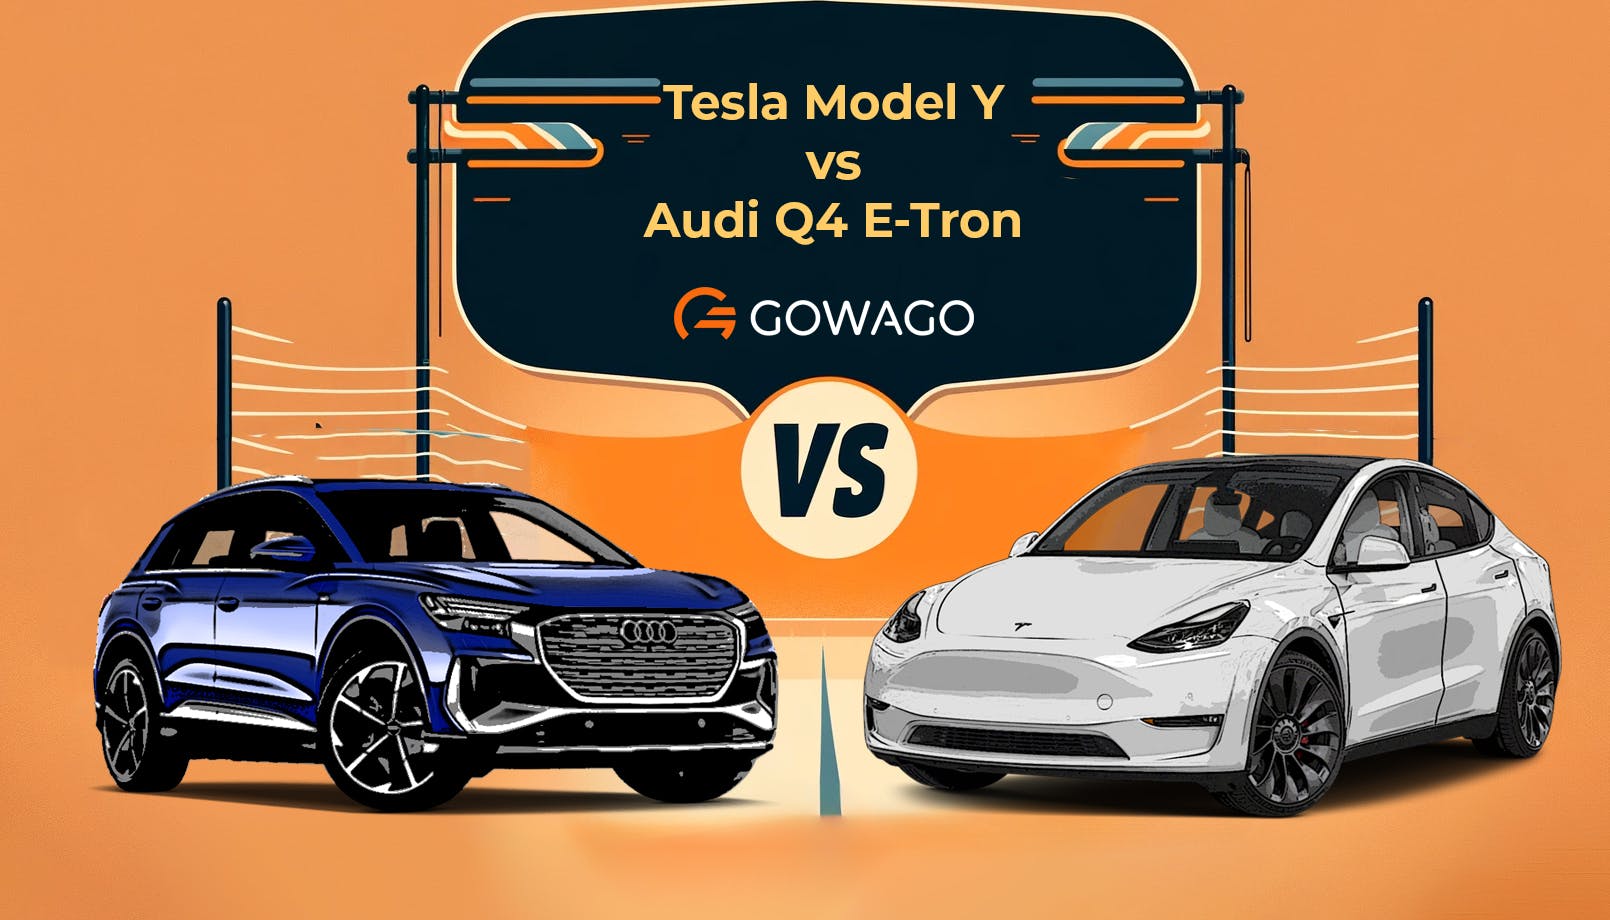 blog item card - Compare Leasing the Tesla Model Y and the Audi Q4 E-Tron - Find out everything about range, performance, equipment, and living with these electric SUVs.